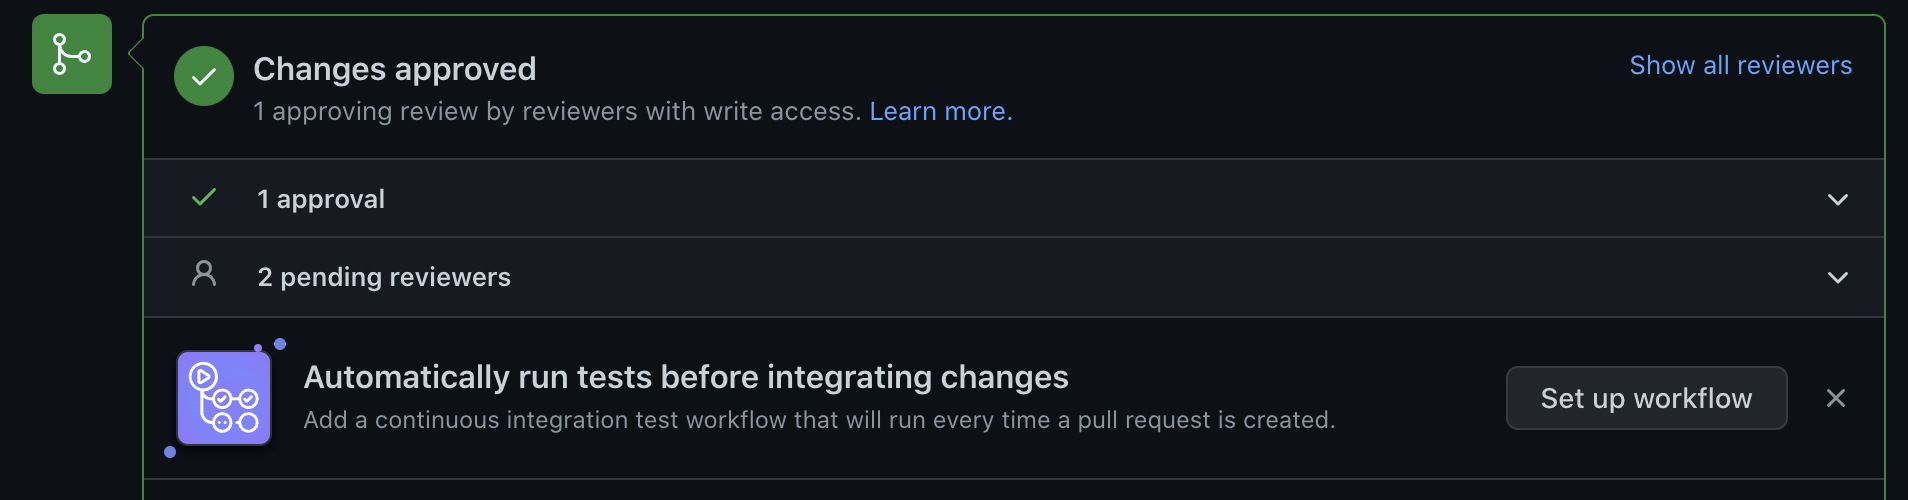 Image of the fix PR in the GitHub private repository, with changes approved but no GitHub Actions running